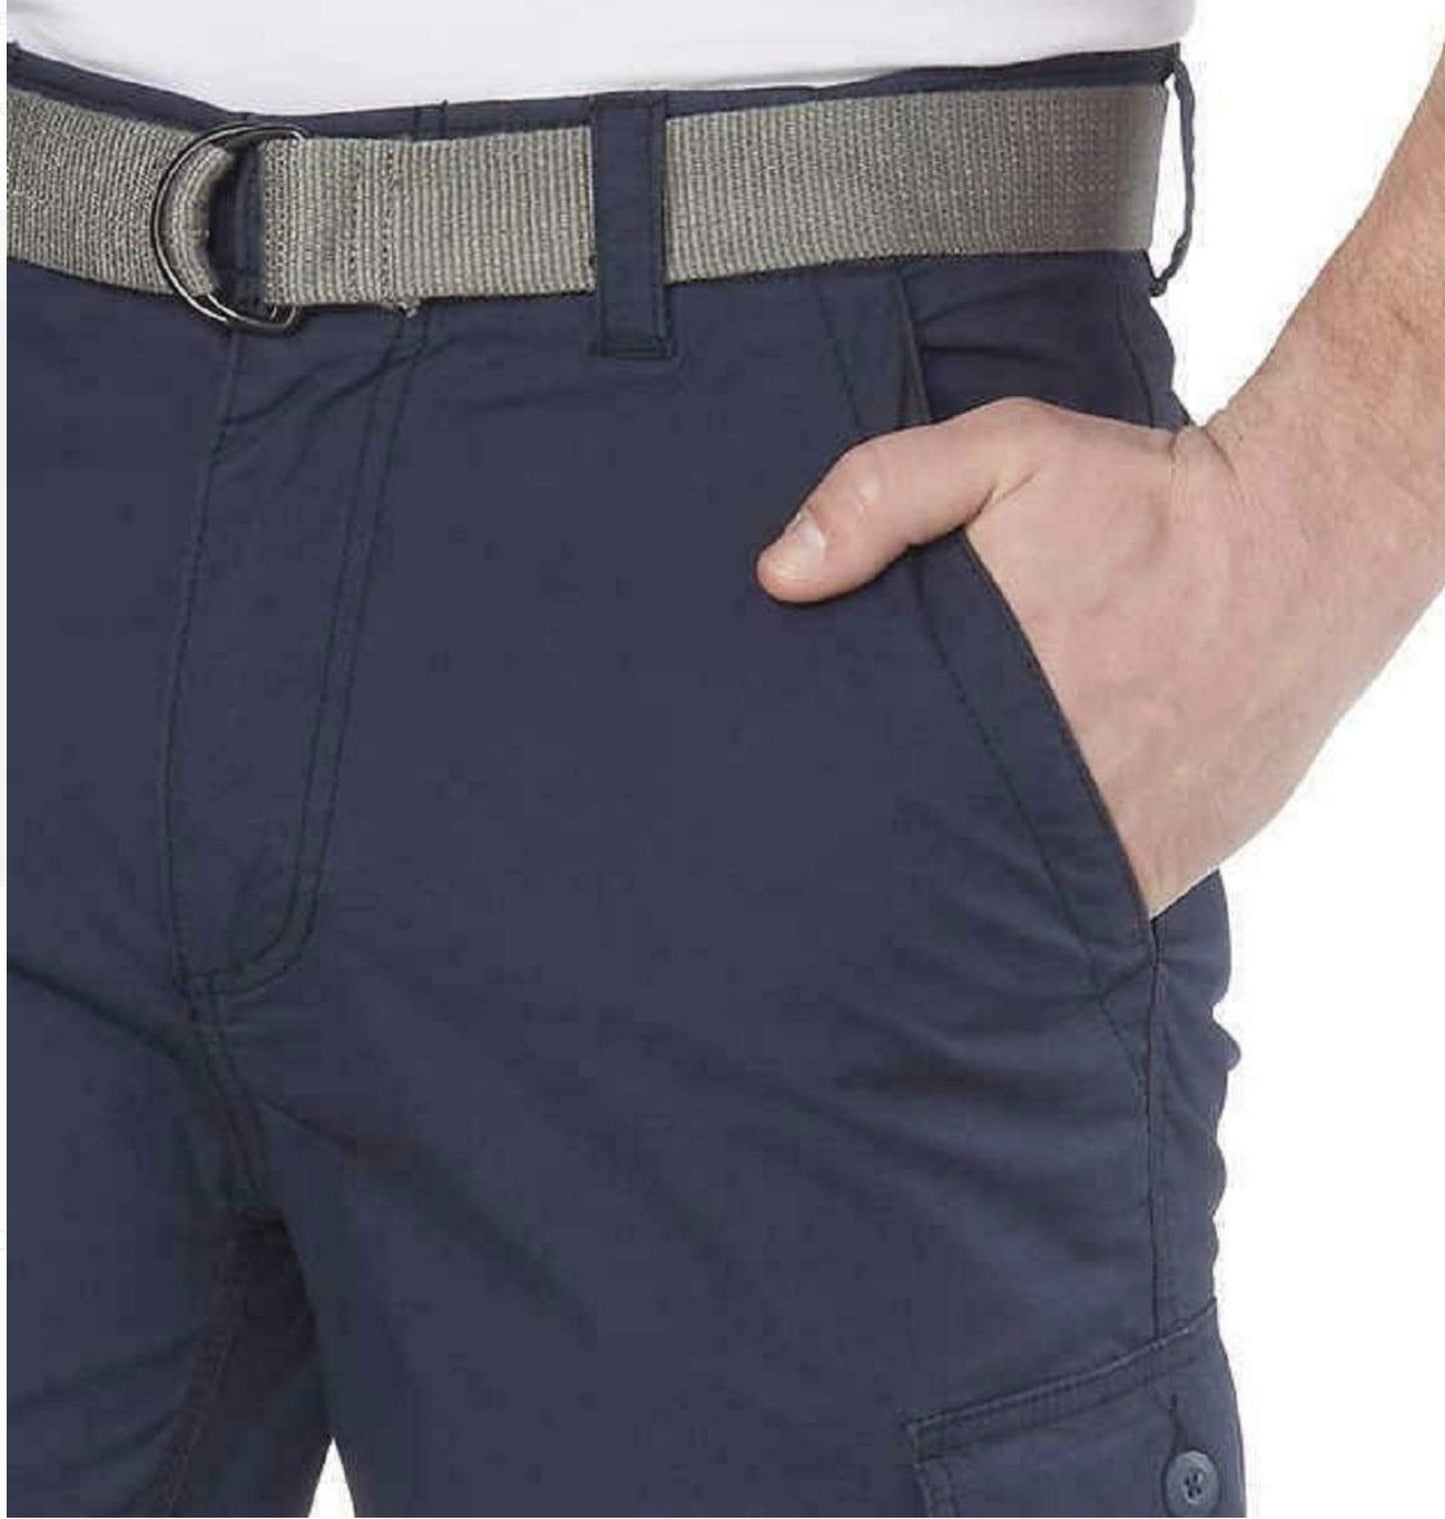 Wear First Stretch Belted Cargo Shorts - Blue Nights - Navy (32)